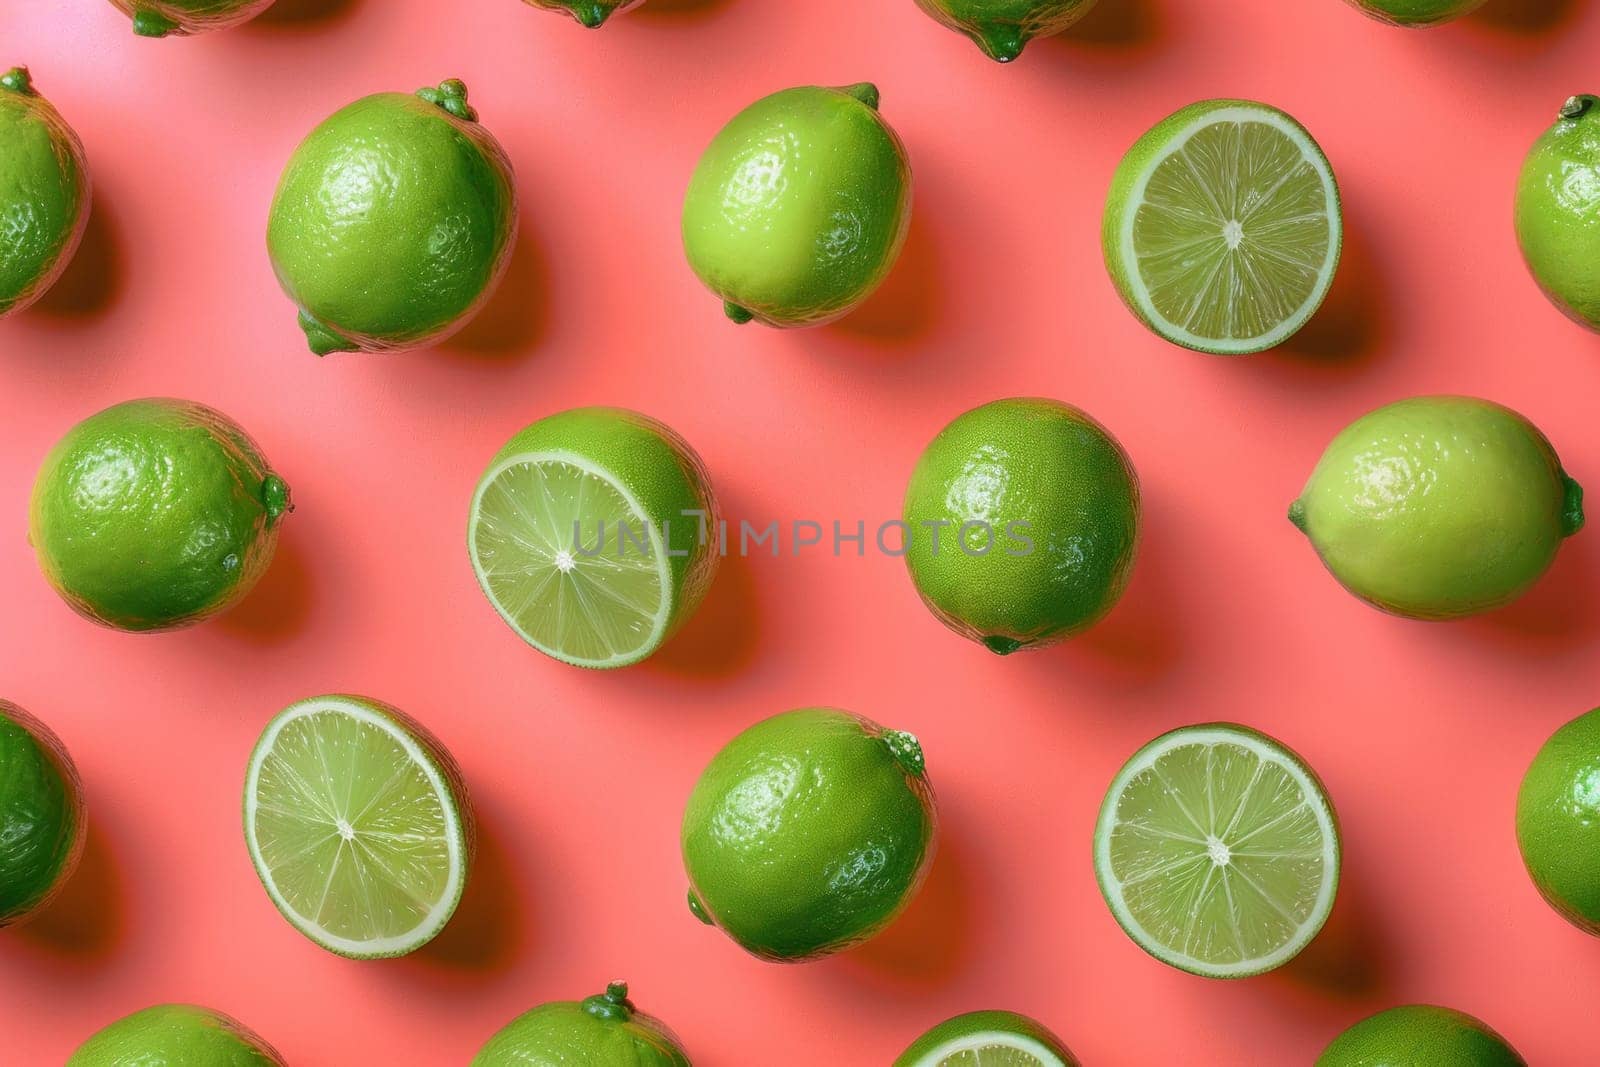 Citrus dream vibrant limes arranged in pattern on bright pink background for kitchen or food concepts